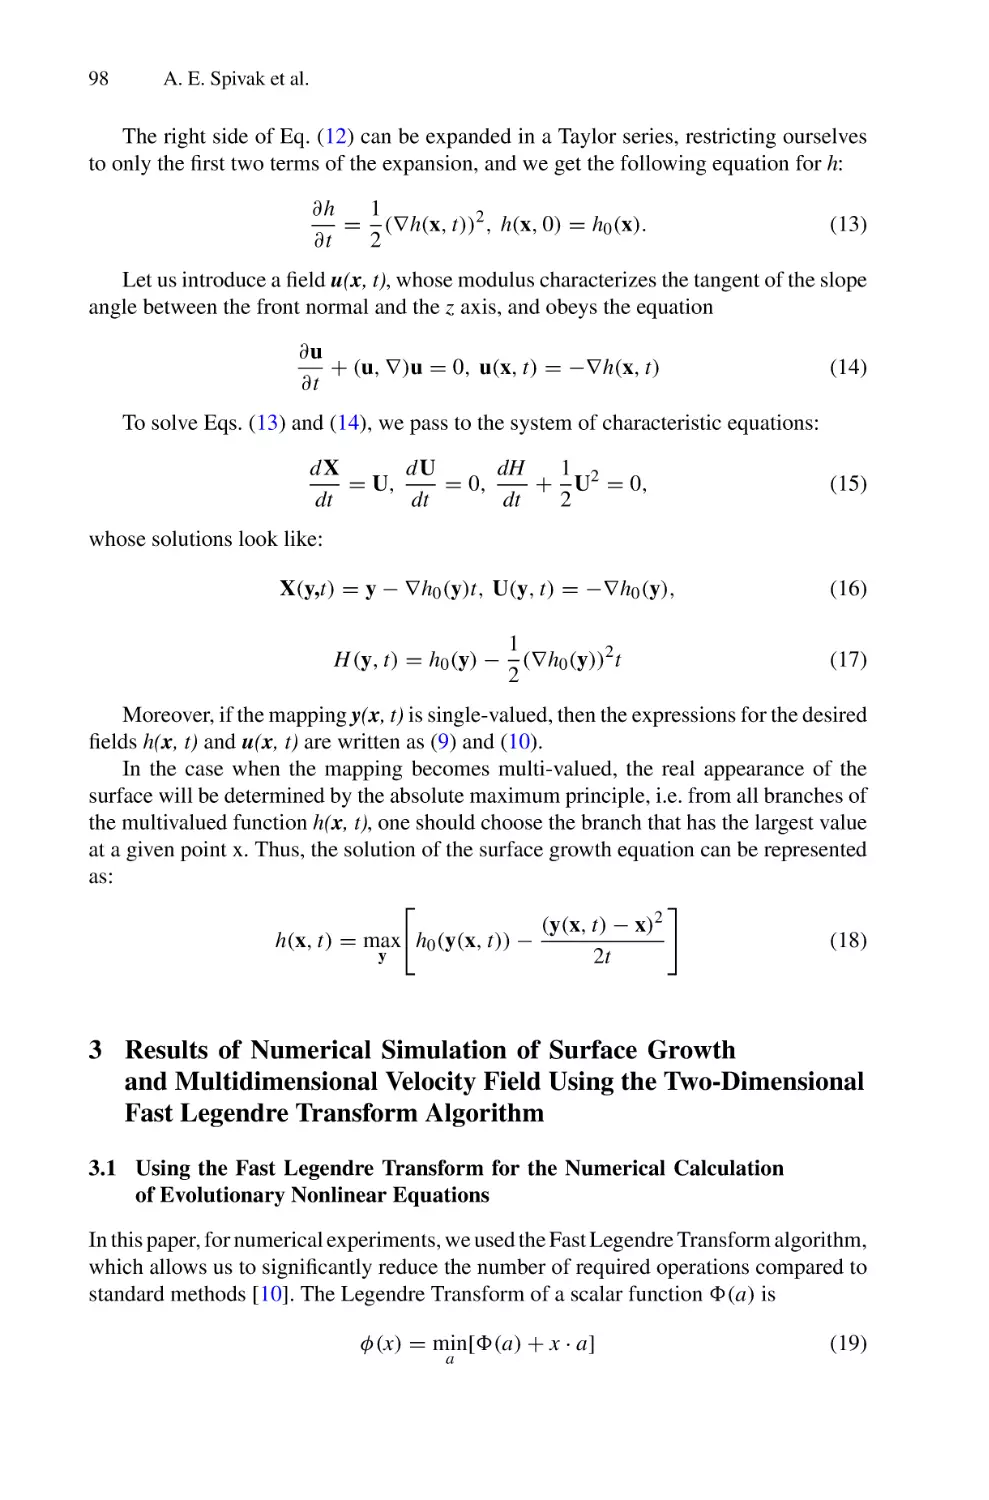 3 Results of Numerical Simulation of Surface Growth and Multidimensional Velocity Field Using the Two-Dimensional Fast Legendre Transform Algorithm
3.1 Using the Fast Legendre Transform for the Numerical Calculation of Evolutionary Nonlinear Equations